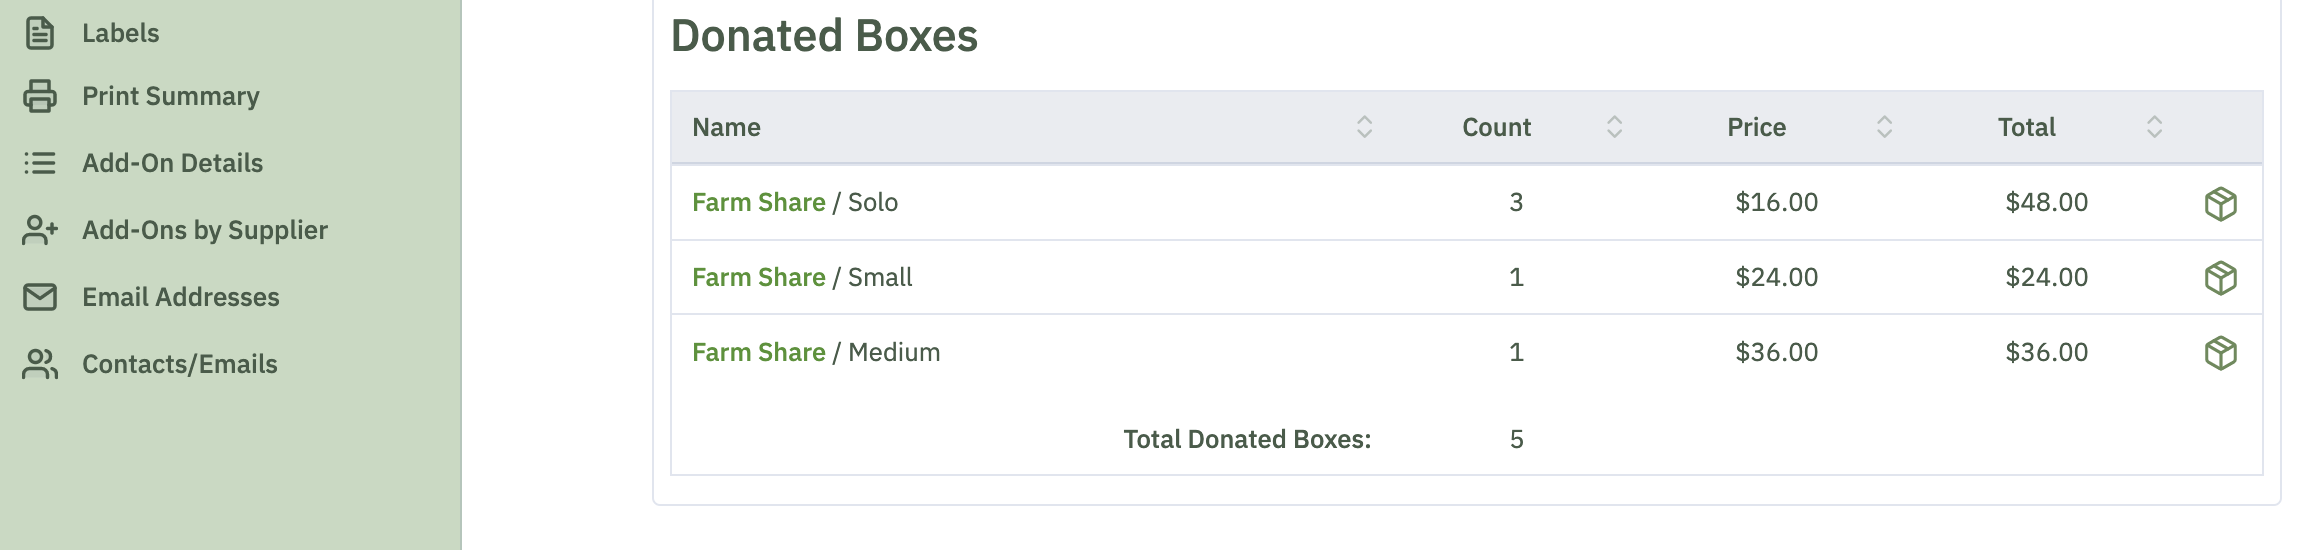 donated_boxes.png